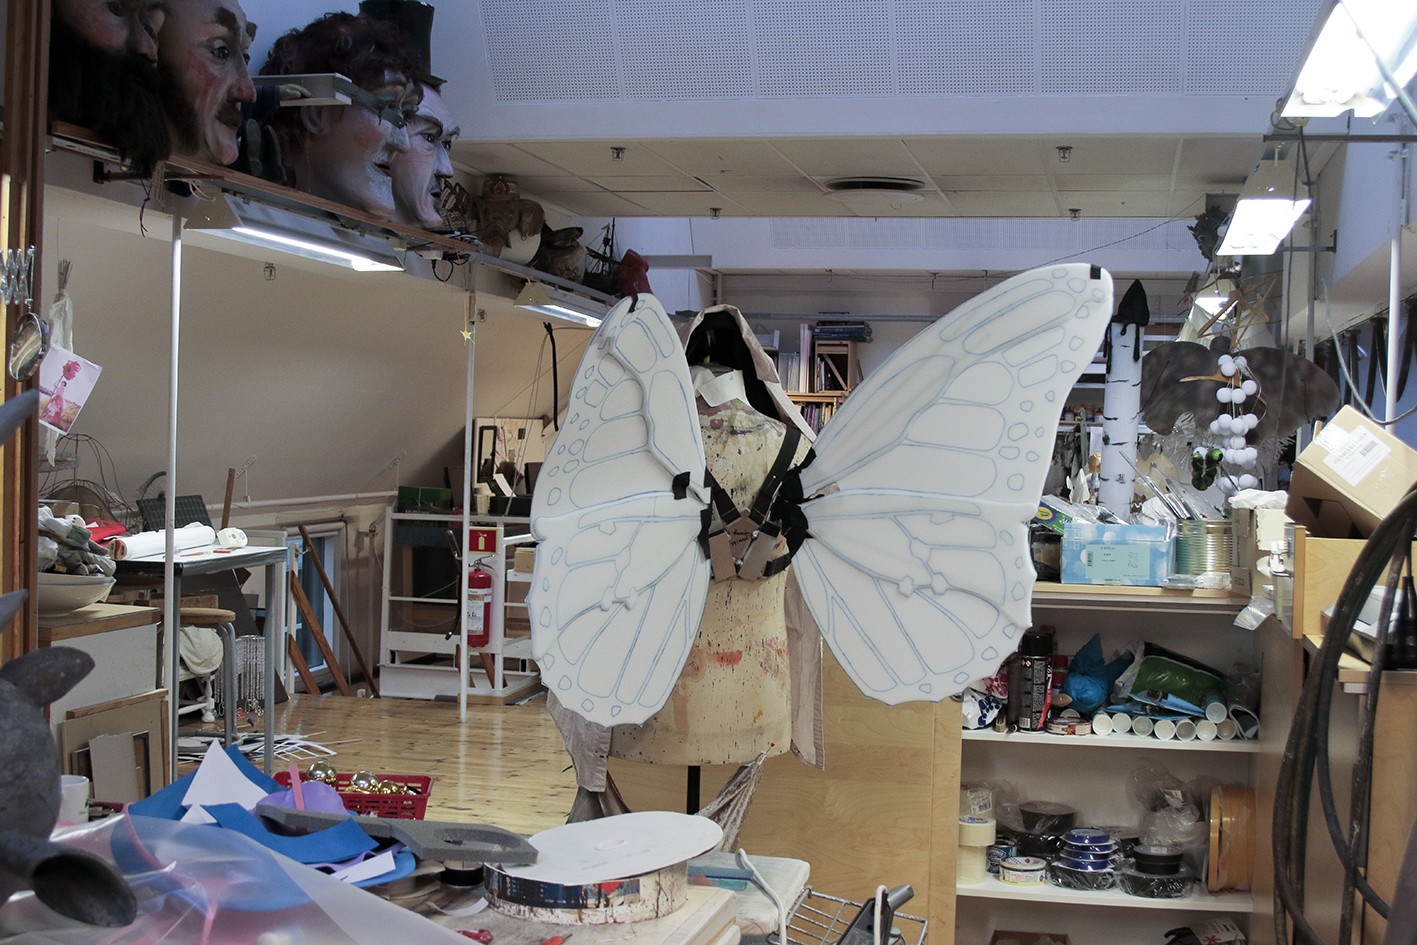 Butterfly wings during production at the studio